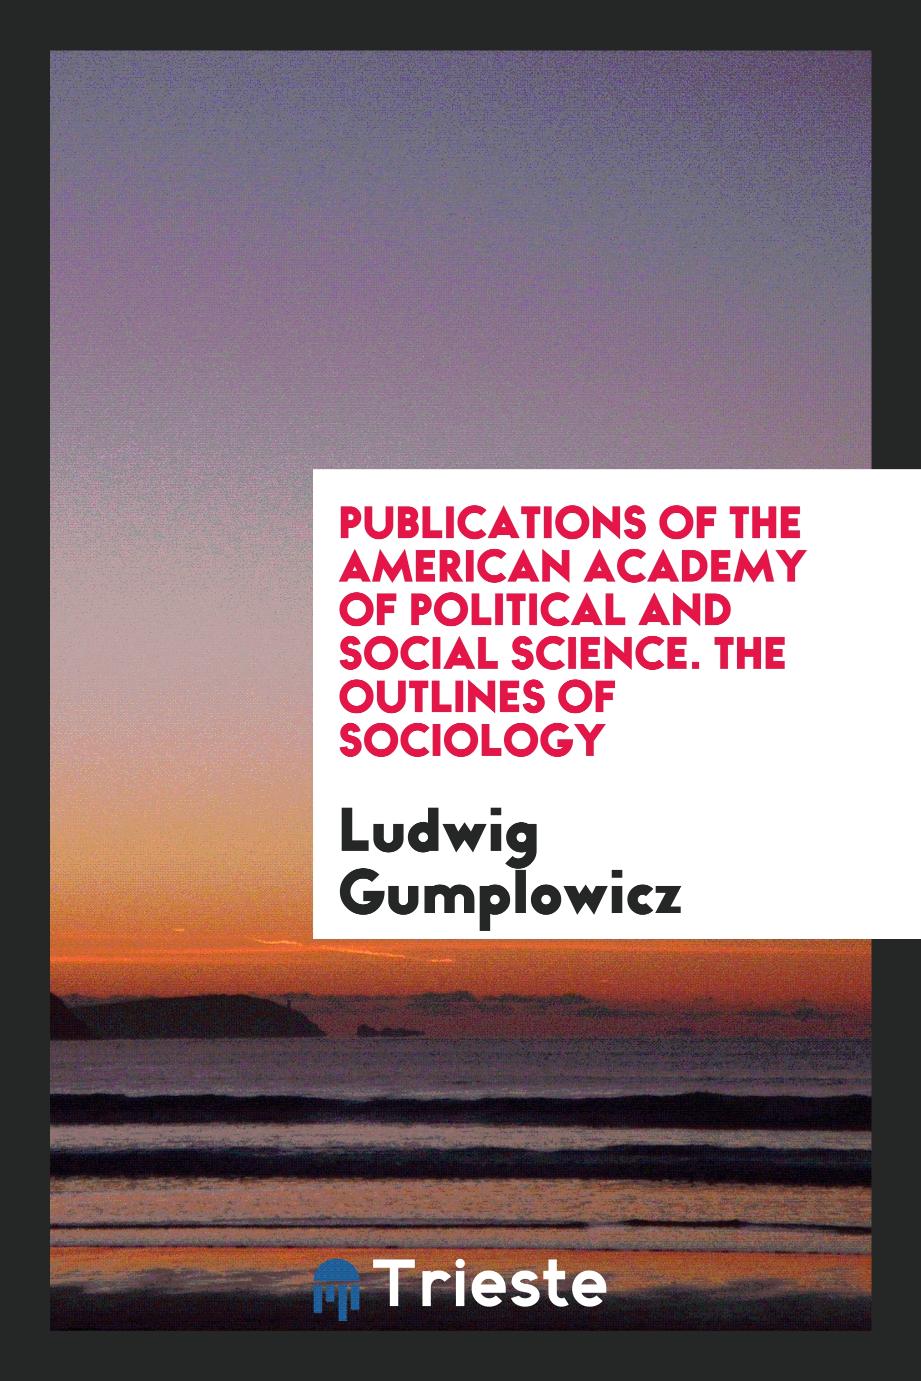 Publications of the American Academy of Political and Social science. The outlines of sociology